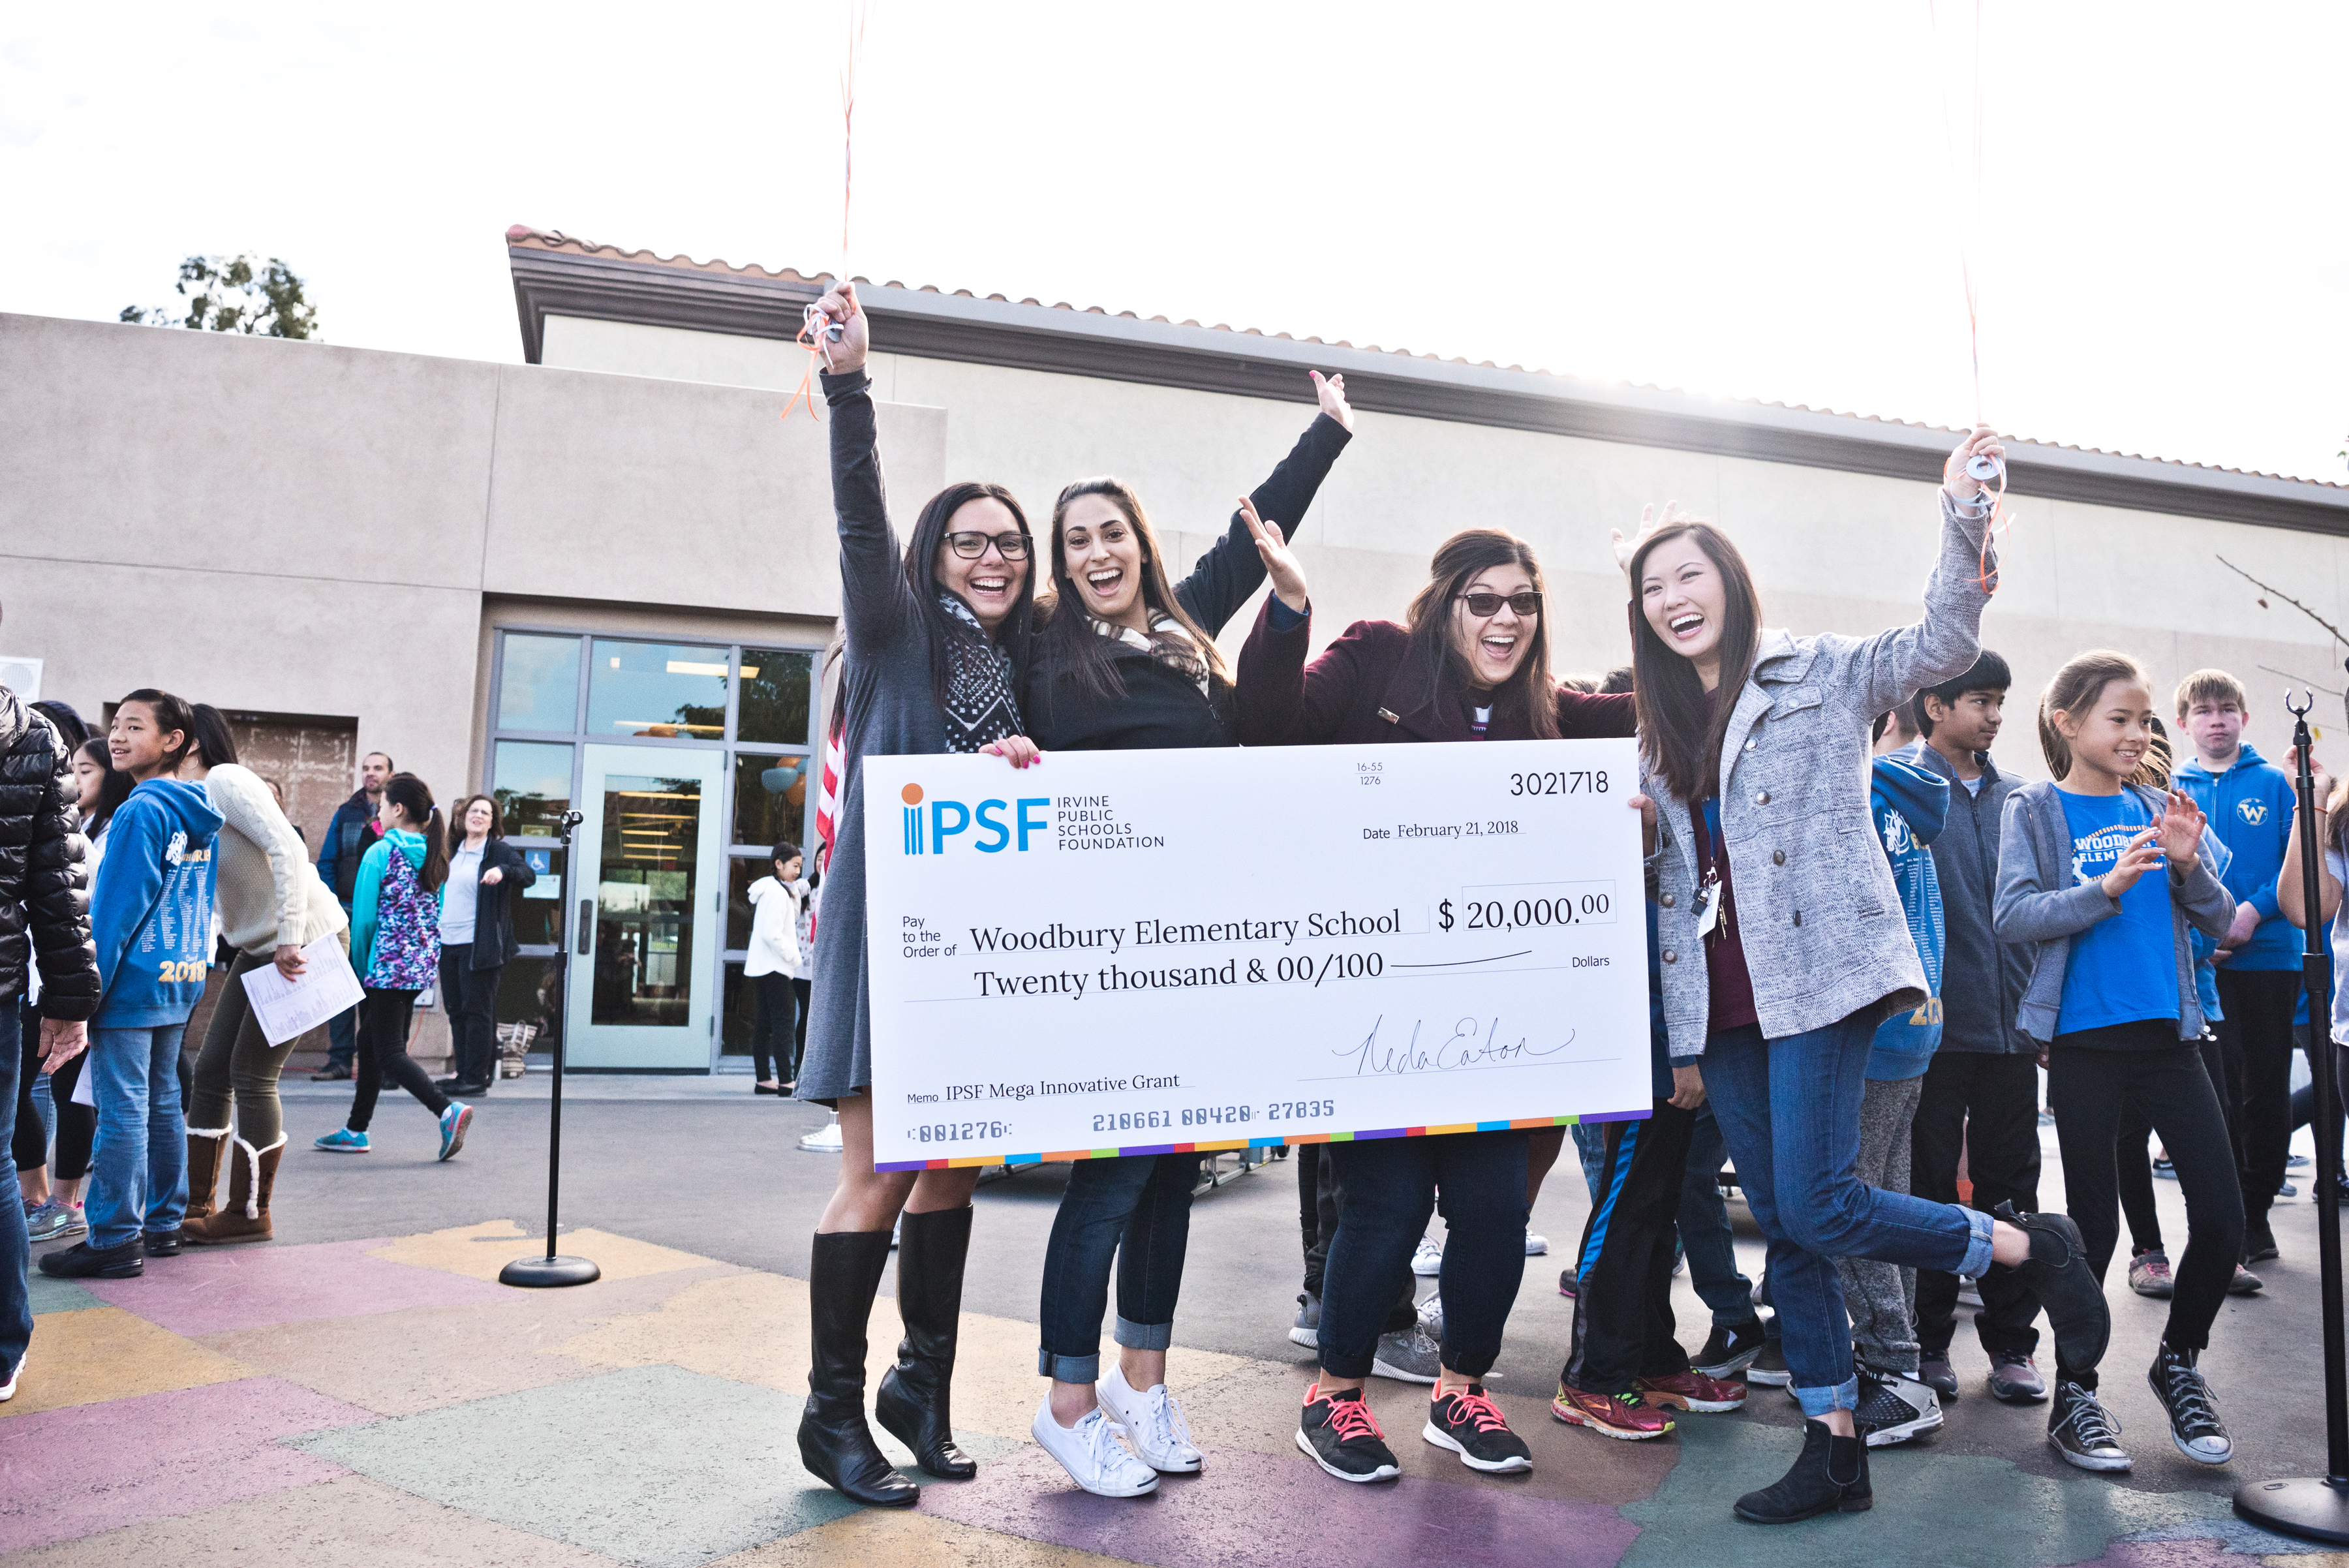 Teresa Yau, Michelle Blanco, Jessica Mossbarger, and Julie Siff of Woodbury Elementary School were awarded an IPSF’s Mega Grant for their project, Build Today, Lead Tomorrow. Photos Courtesy of Lisa Hu Chen